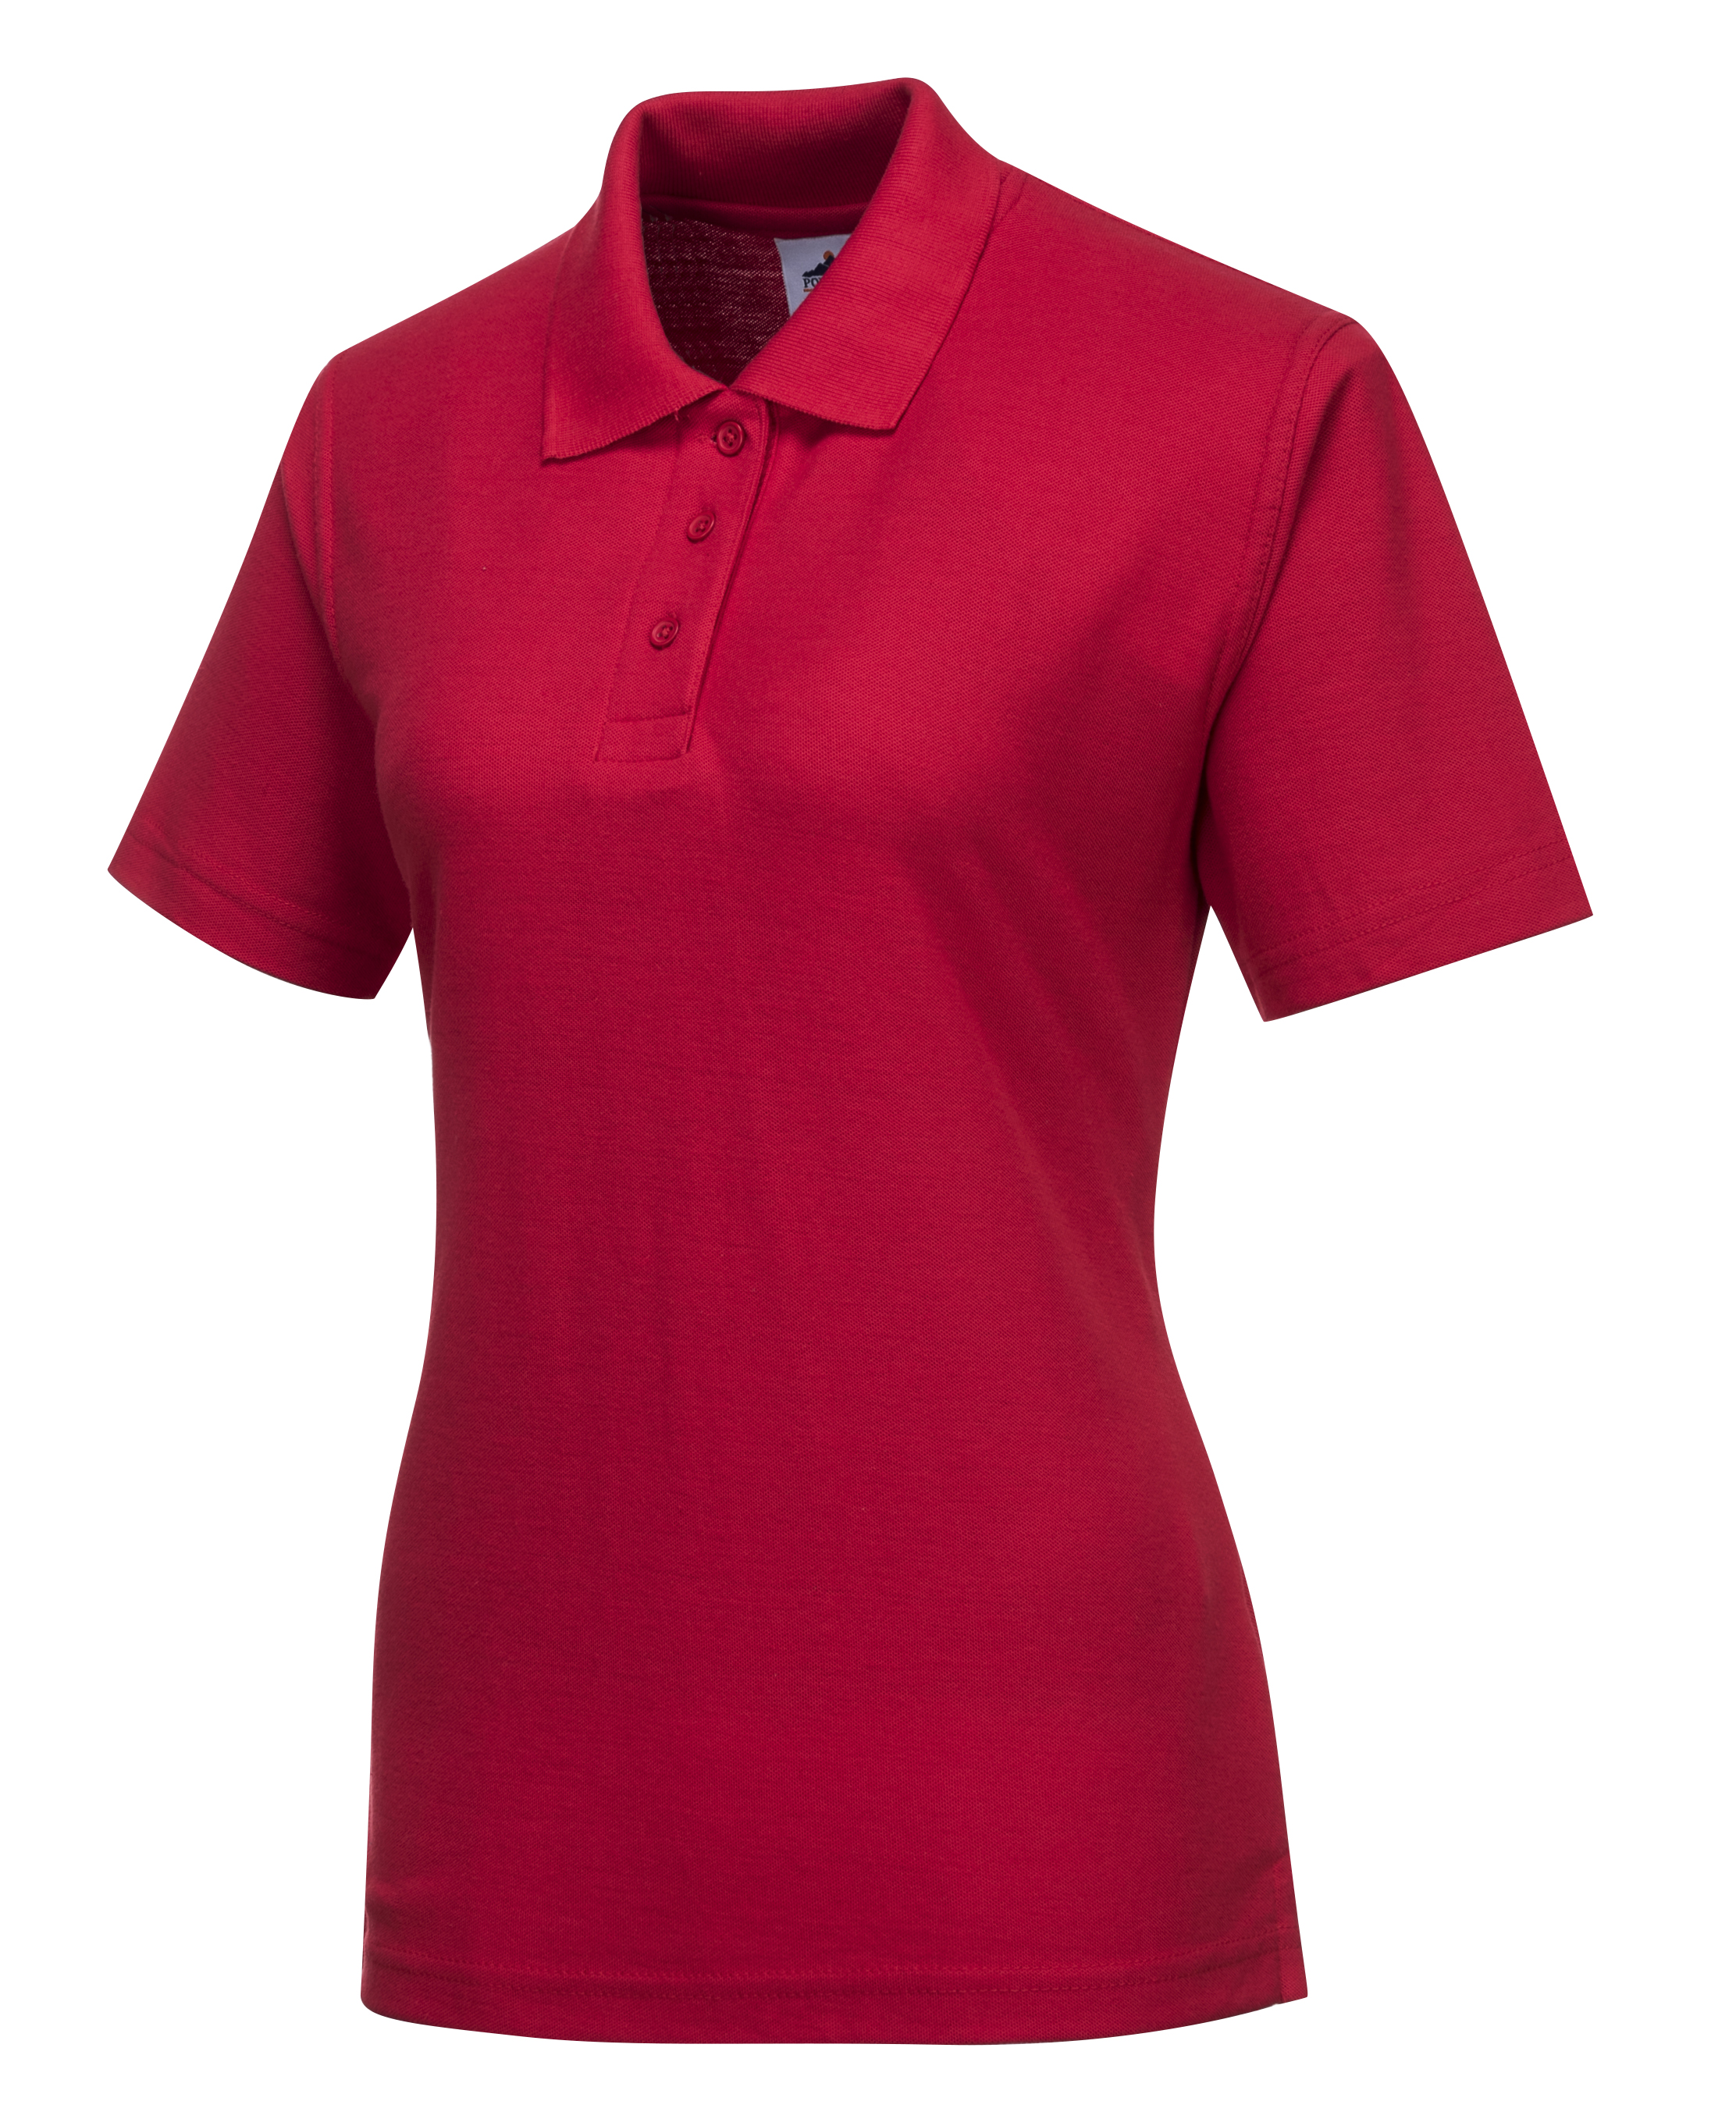 ax-httpss3.eu-west-2.amazonaws.comwebsystemstmp_for_downloadportwest-naples-ladies-polo-shirt-red.jpeg